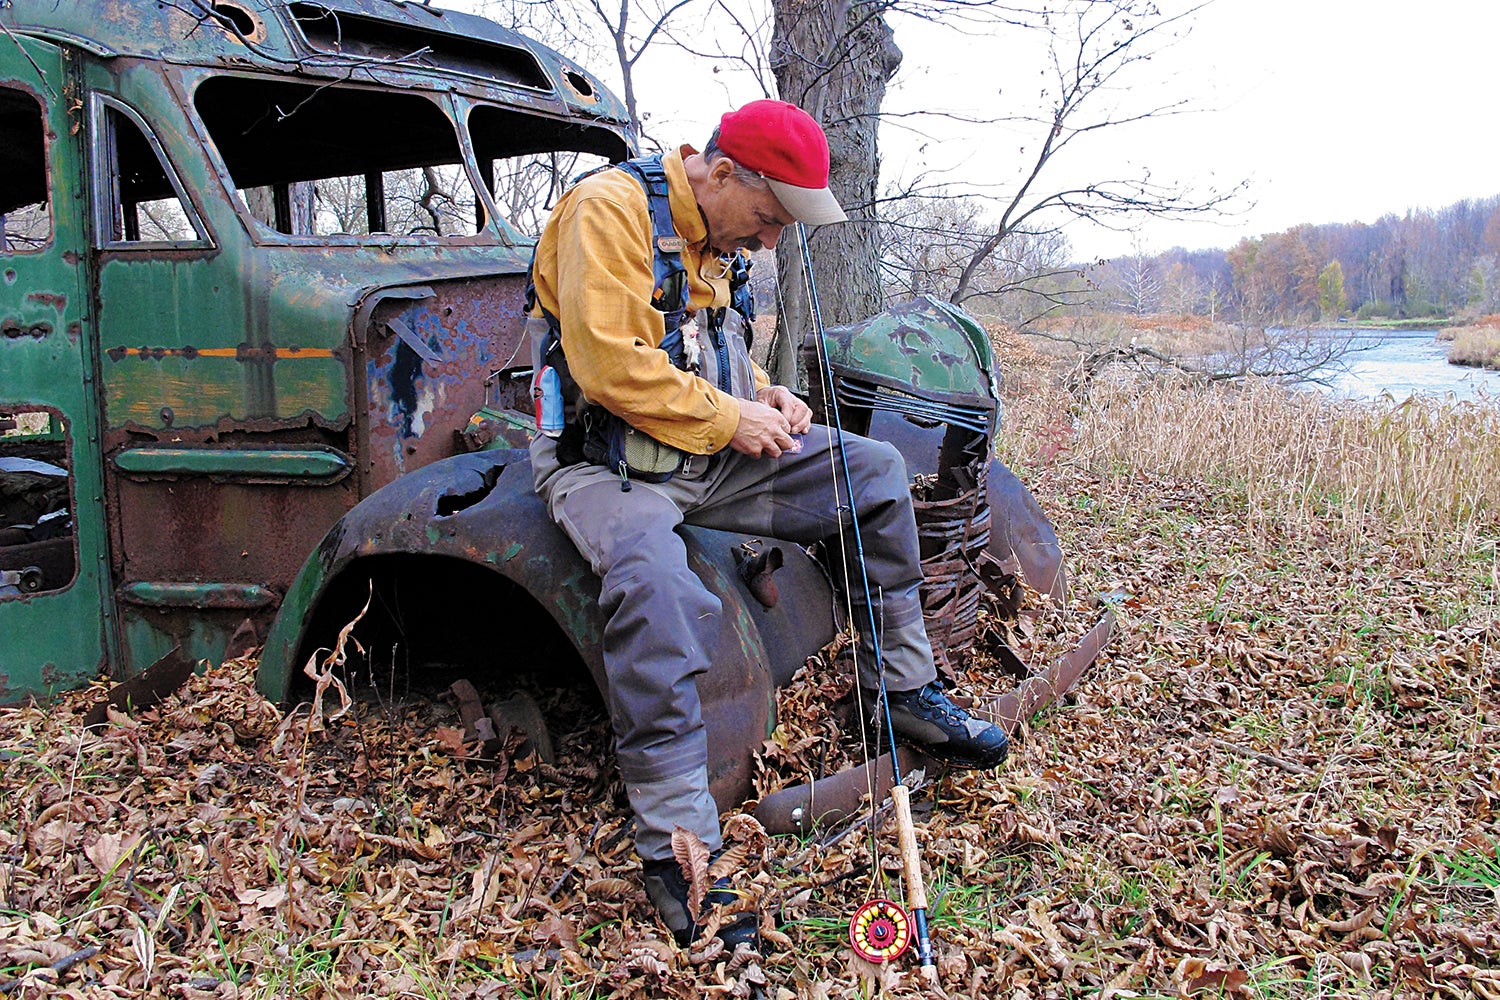 Angler sits on rusted-out bus to tie a fly to his line.